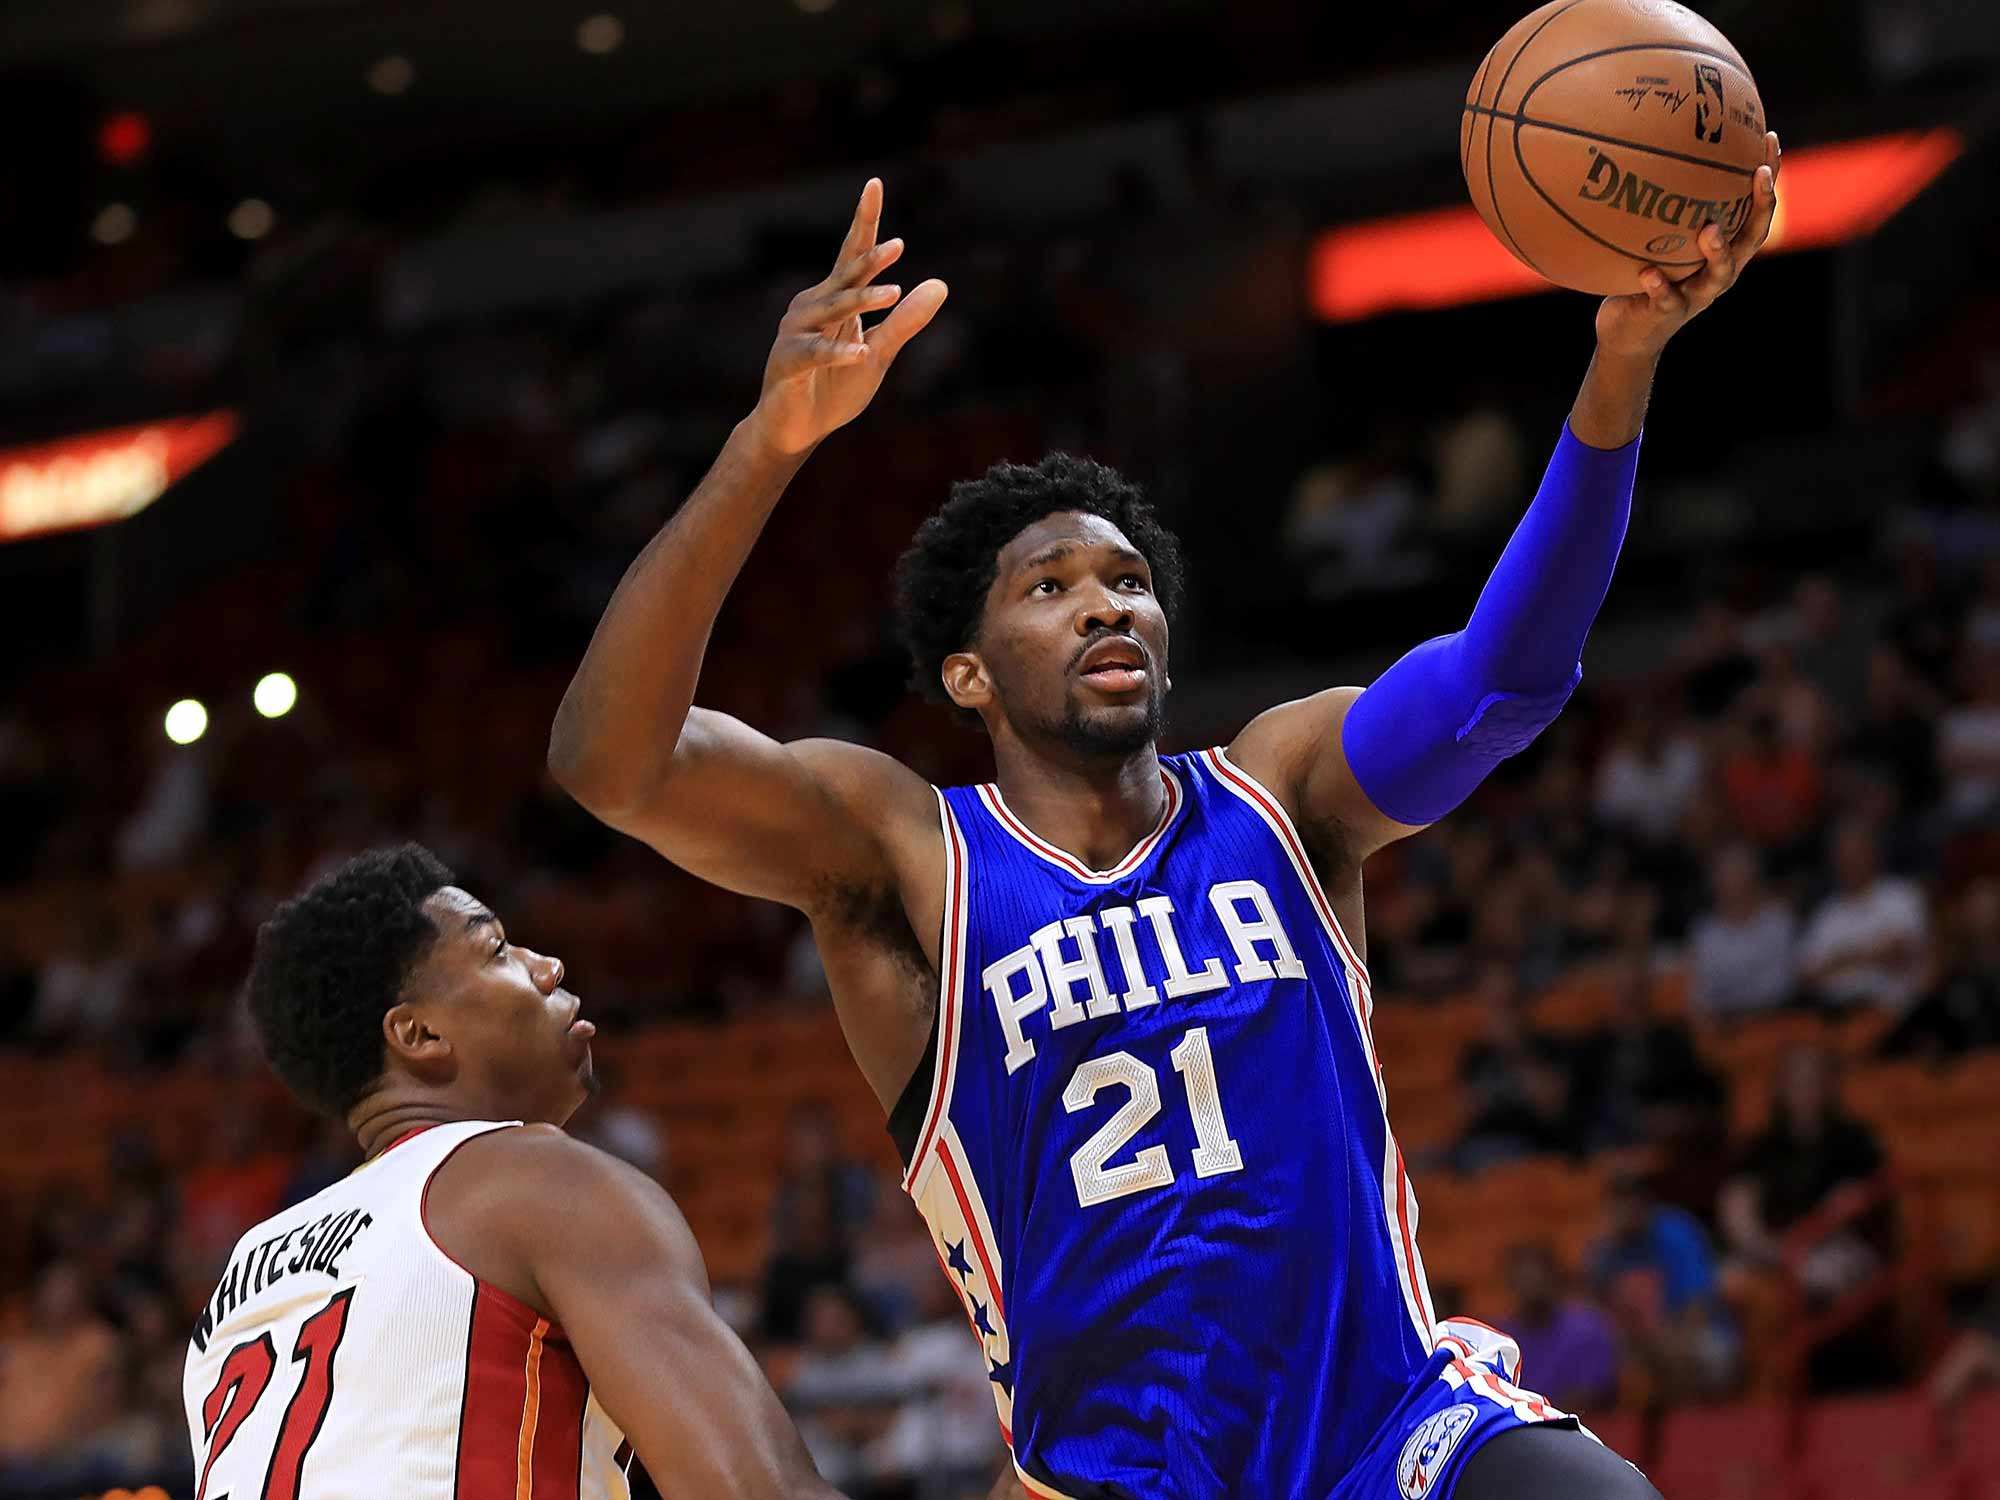 WATCH: Joel Embiid Has The Block Of The Year